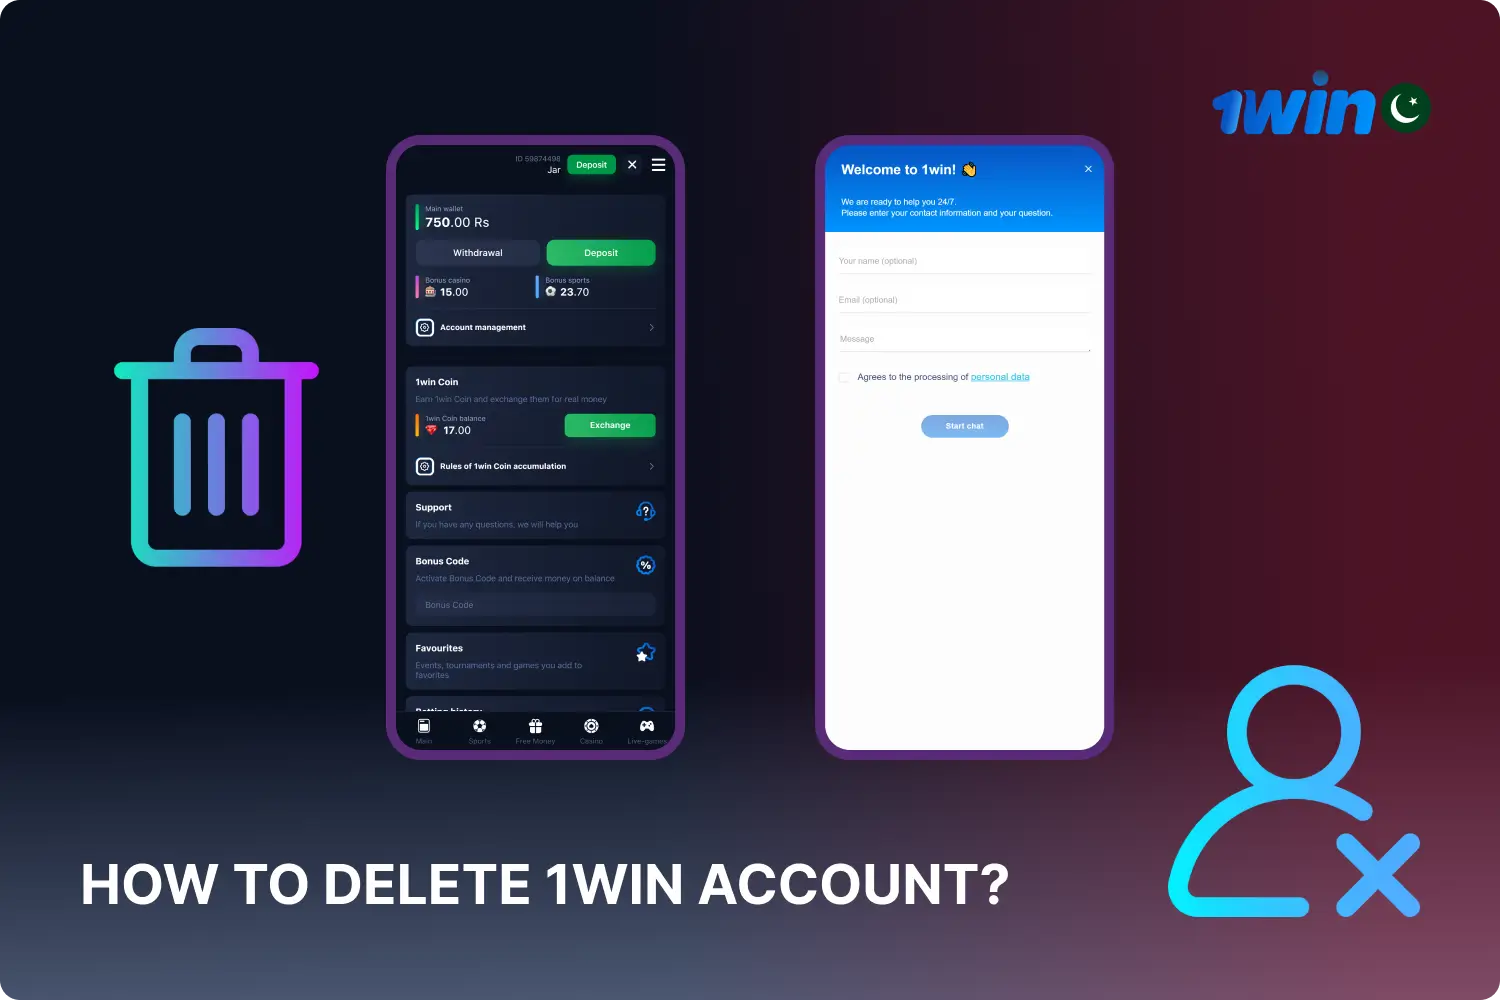 To delete your account on the 1win platform, users need to follow several steps